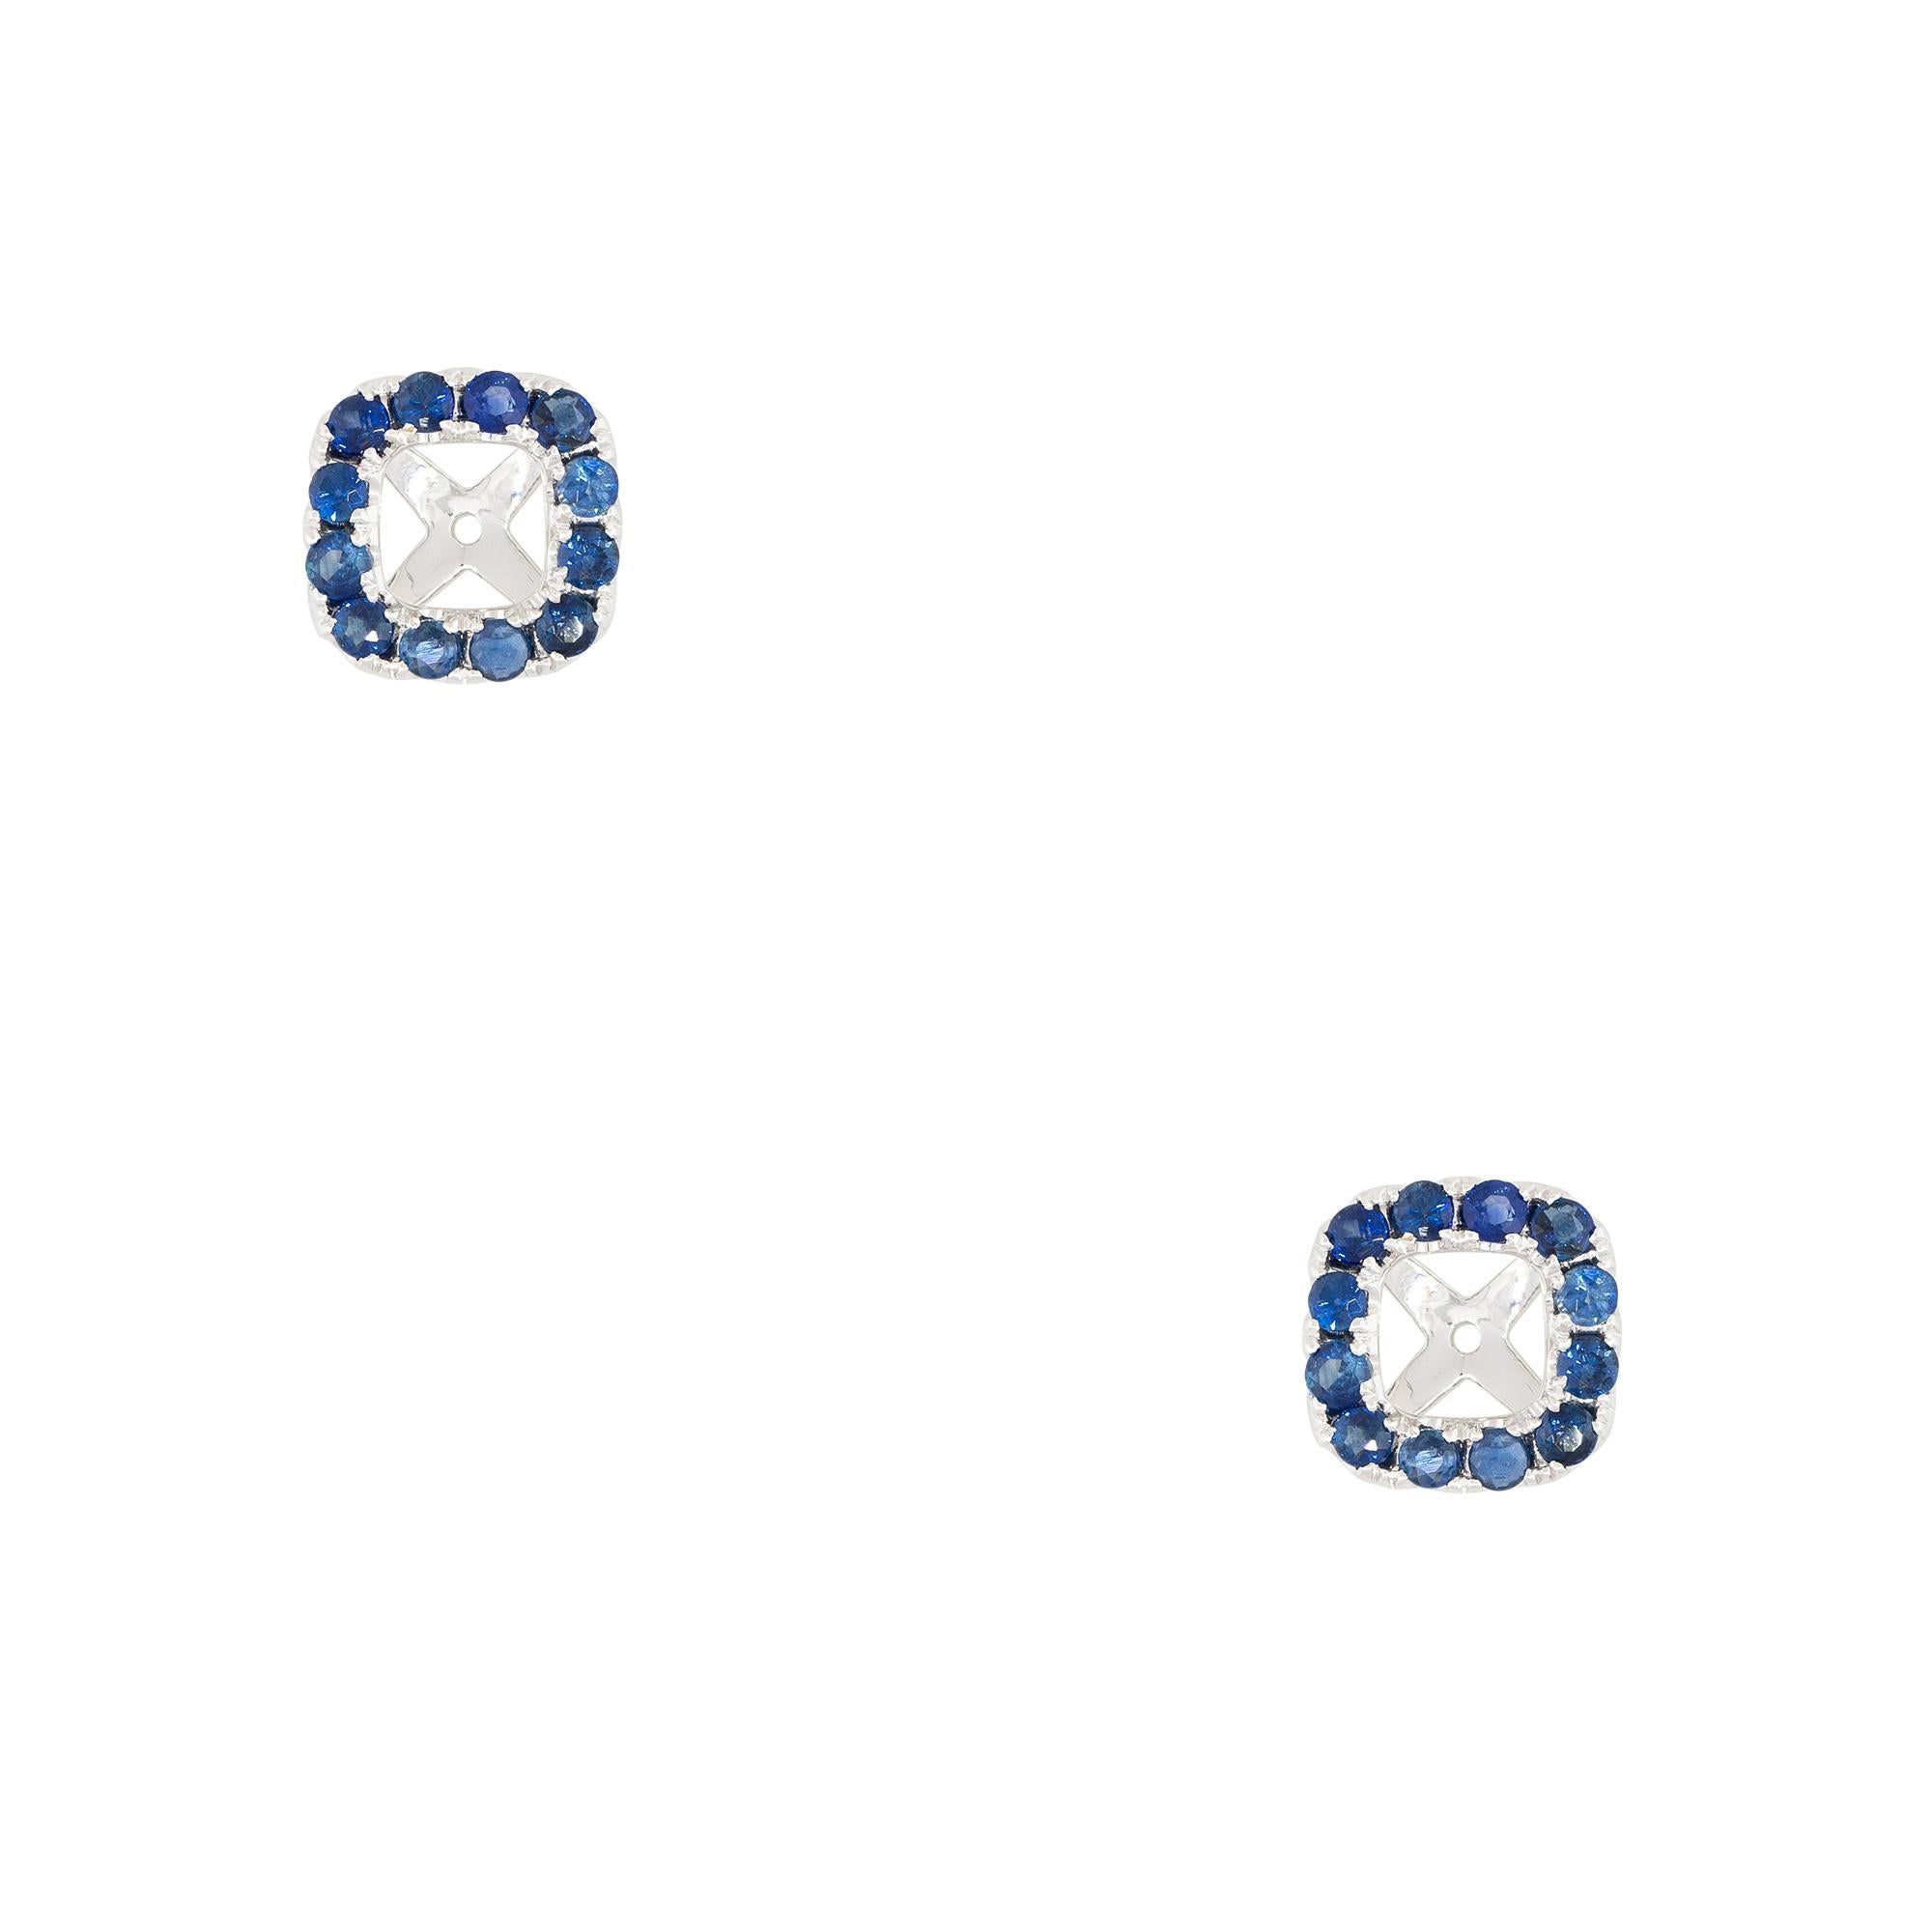 18k White Gold 1.54ctw Sapphire Stud Earring Jackets
Material: Stud Jackets- 18k White Gold
Gemstone/Earring Jacket Details: Approximately 1.54ctw of Sapphire Gemstones. There are 12 Gemstones in each jacket, 24 stones total
Dimensions: Jacket